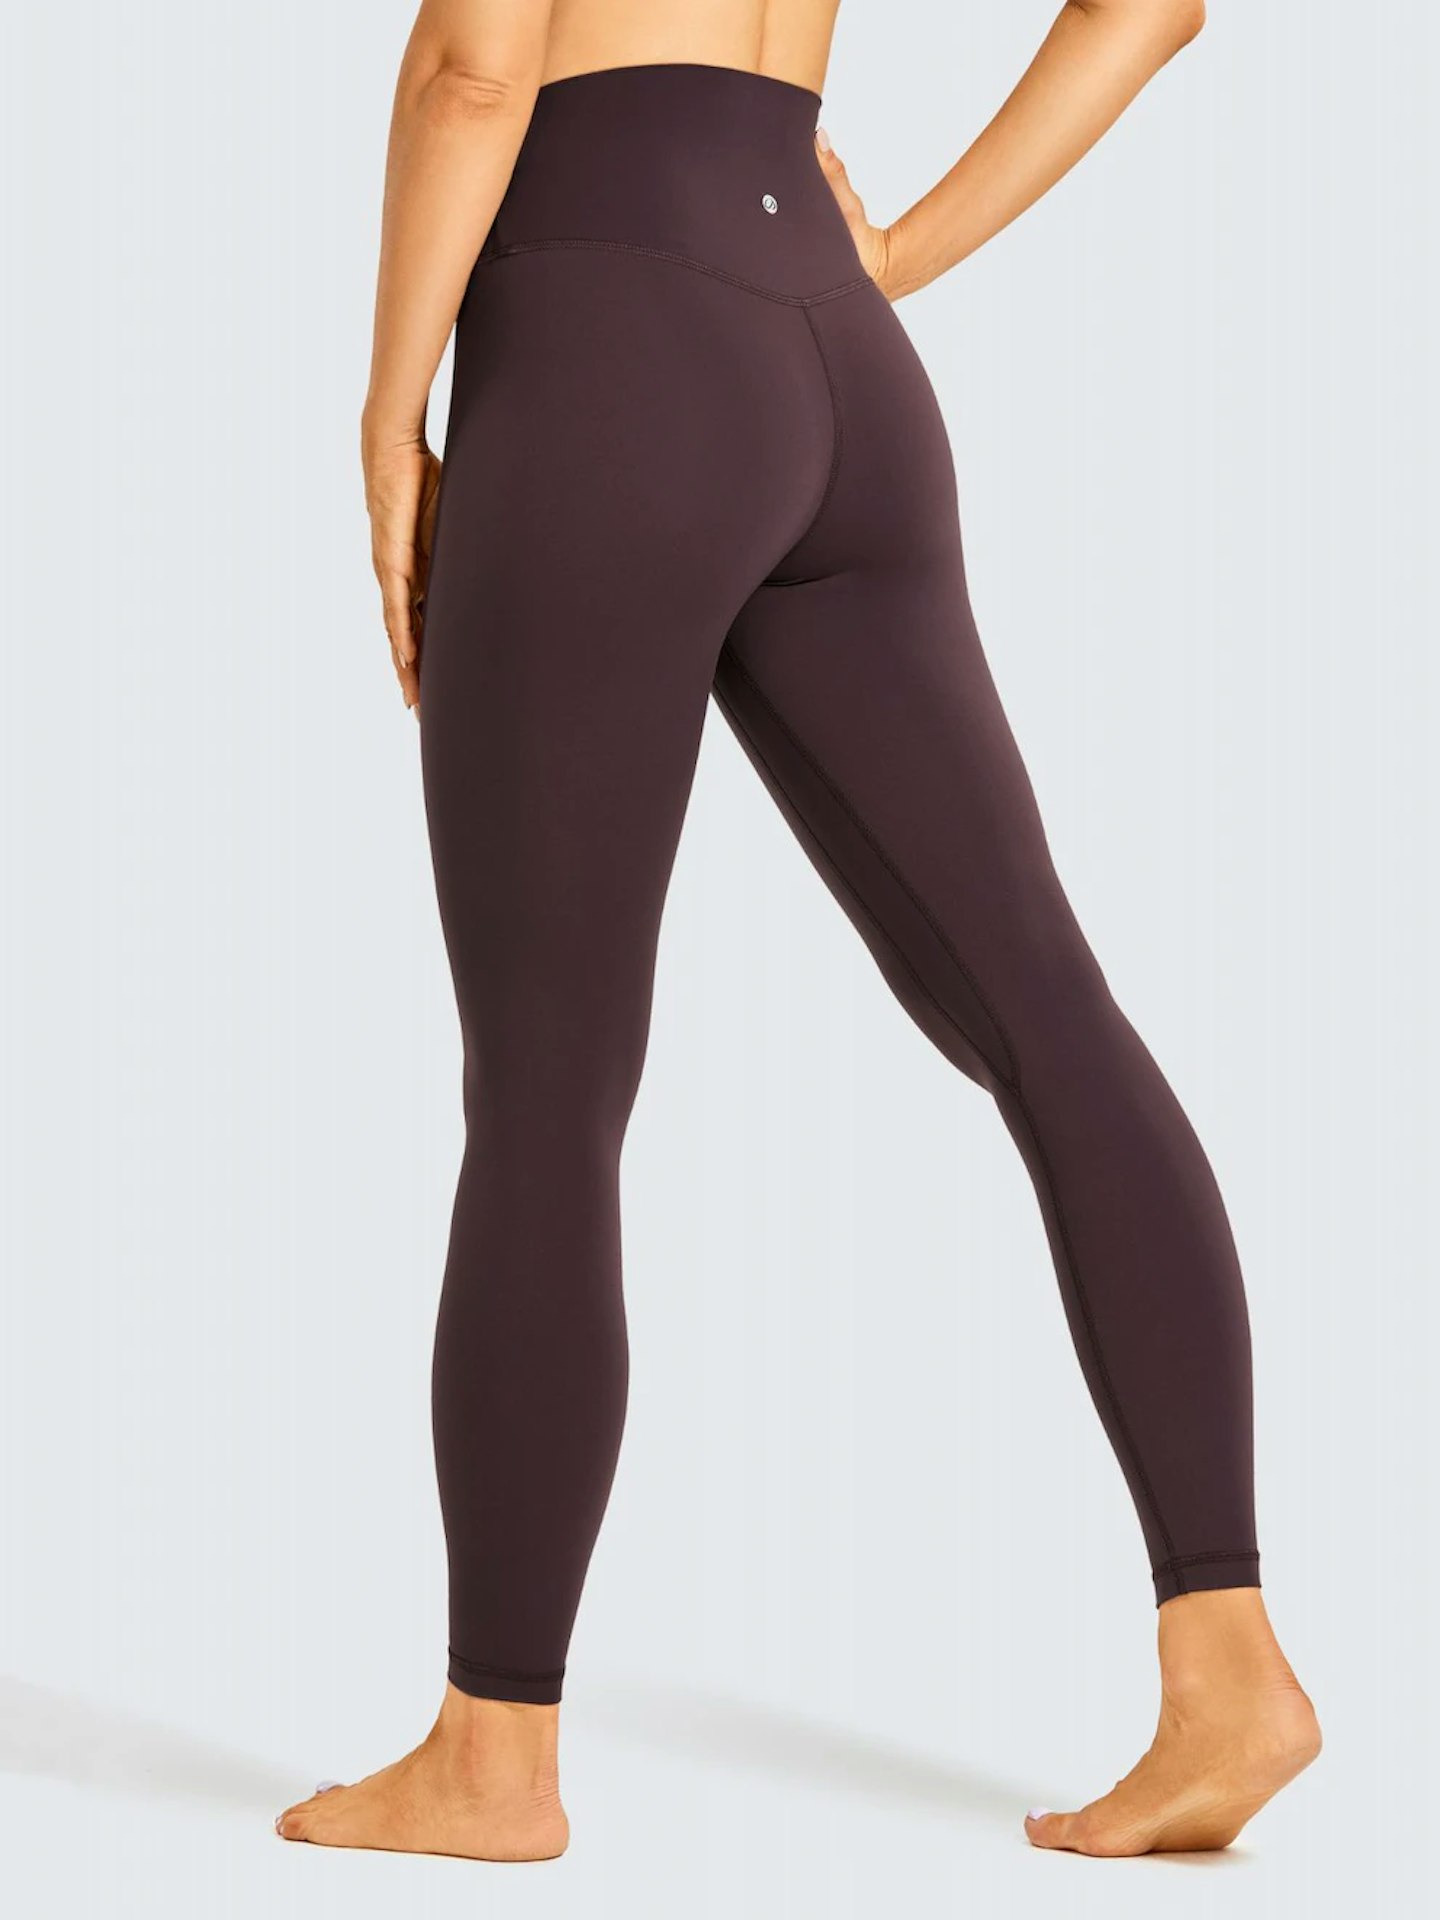 lululemon dupes from  + more  stuff